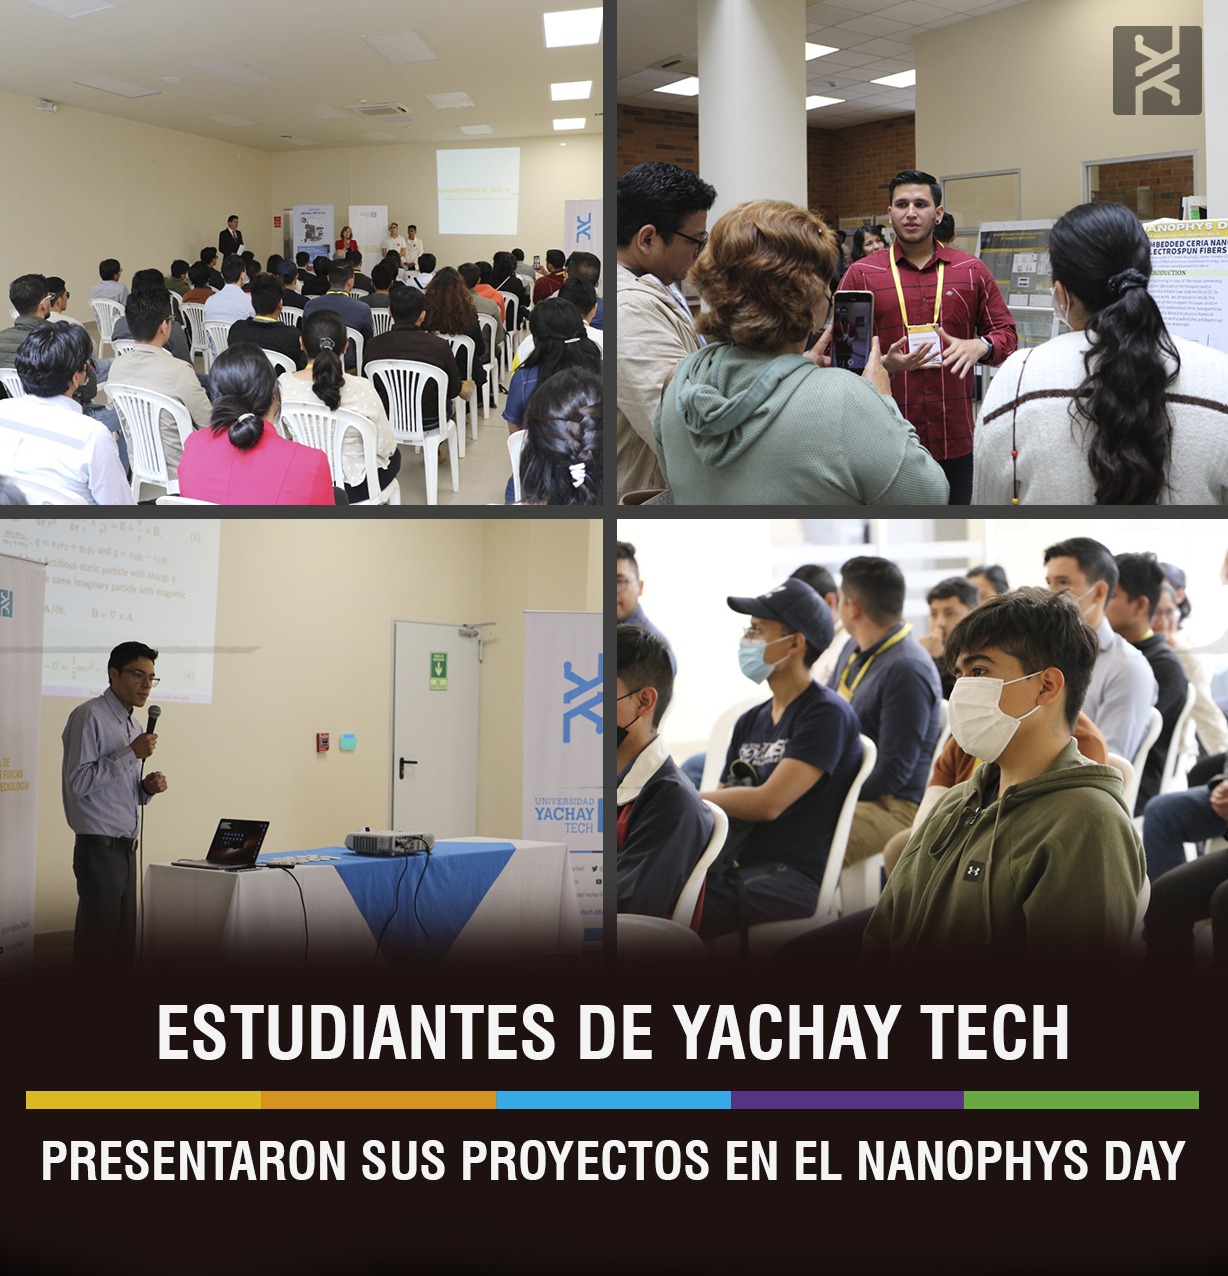 YACHAY TECH STUDENTS PRESENT PROJECTS AT NANOPHYS DAY